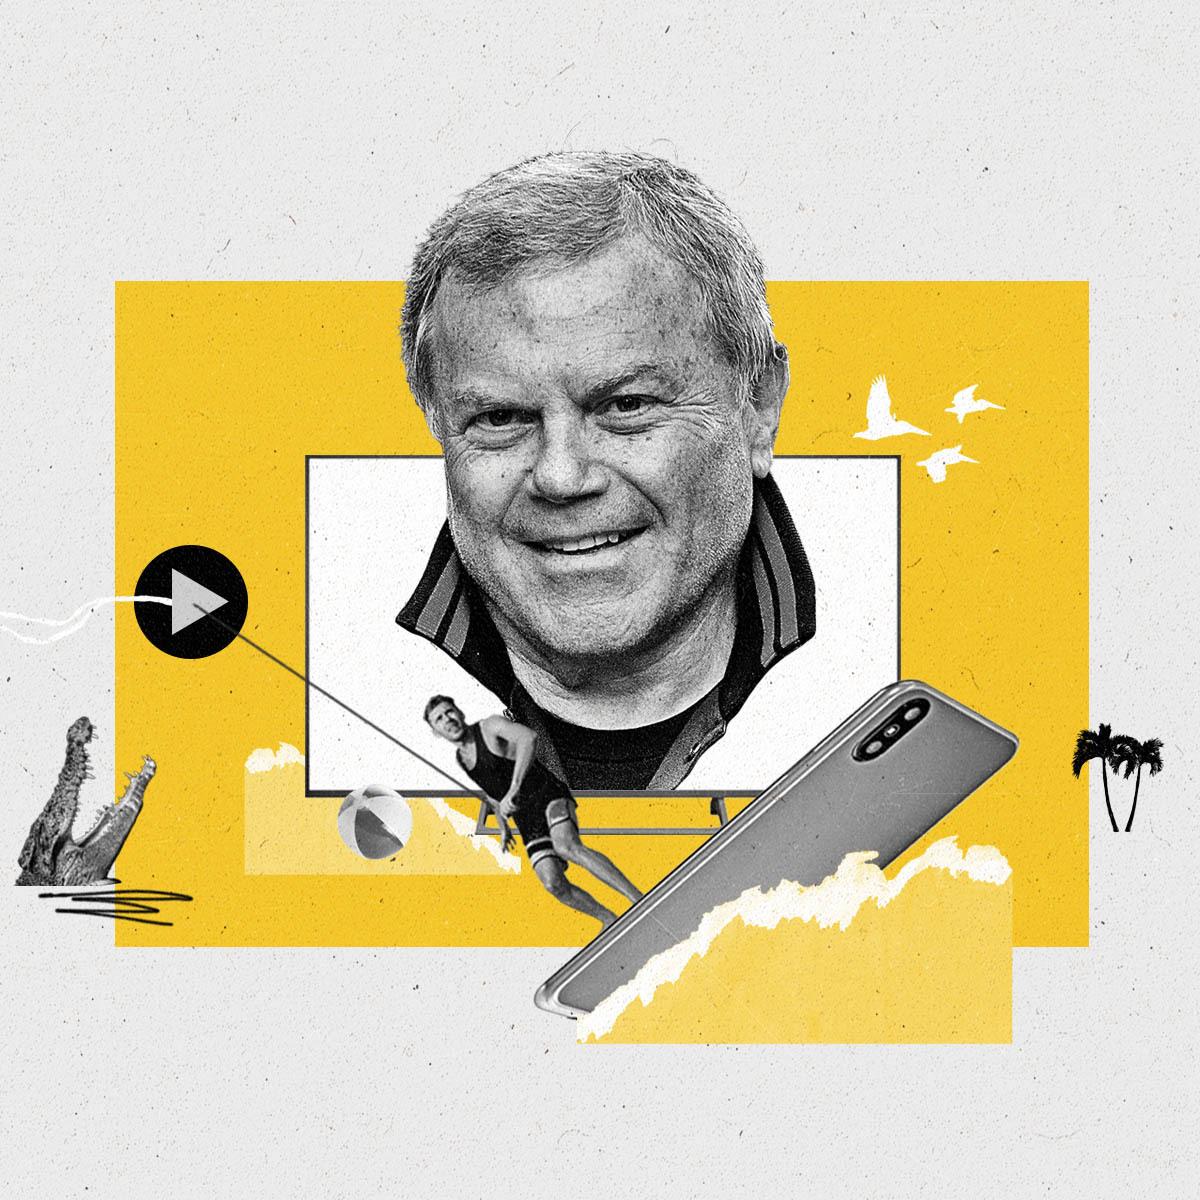 An image of Martin Sorrell on a connected TV sits above a man surfing a smartphone with a play button kite.